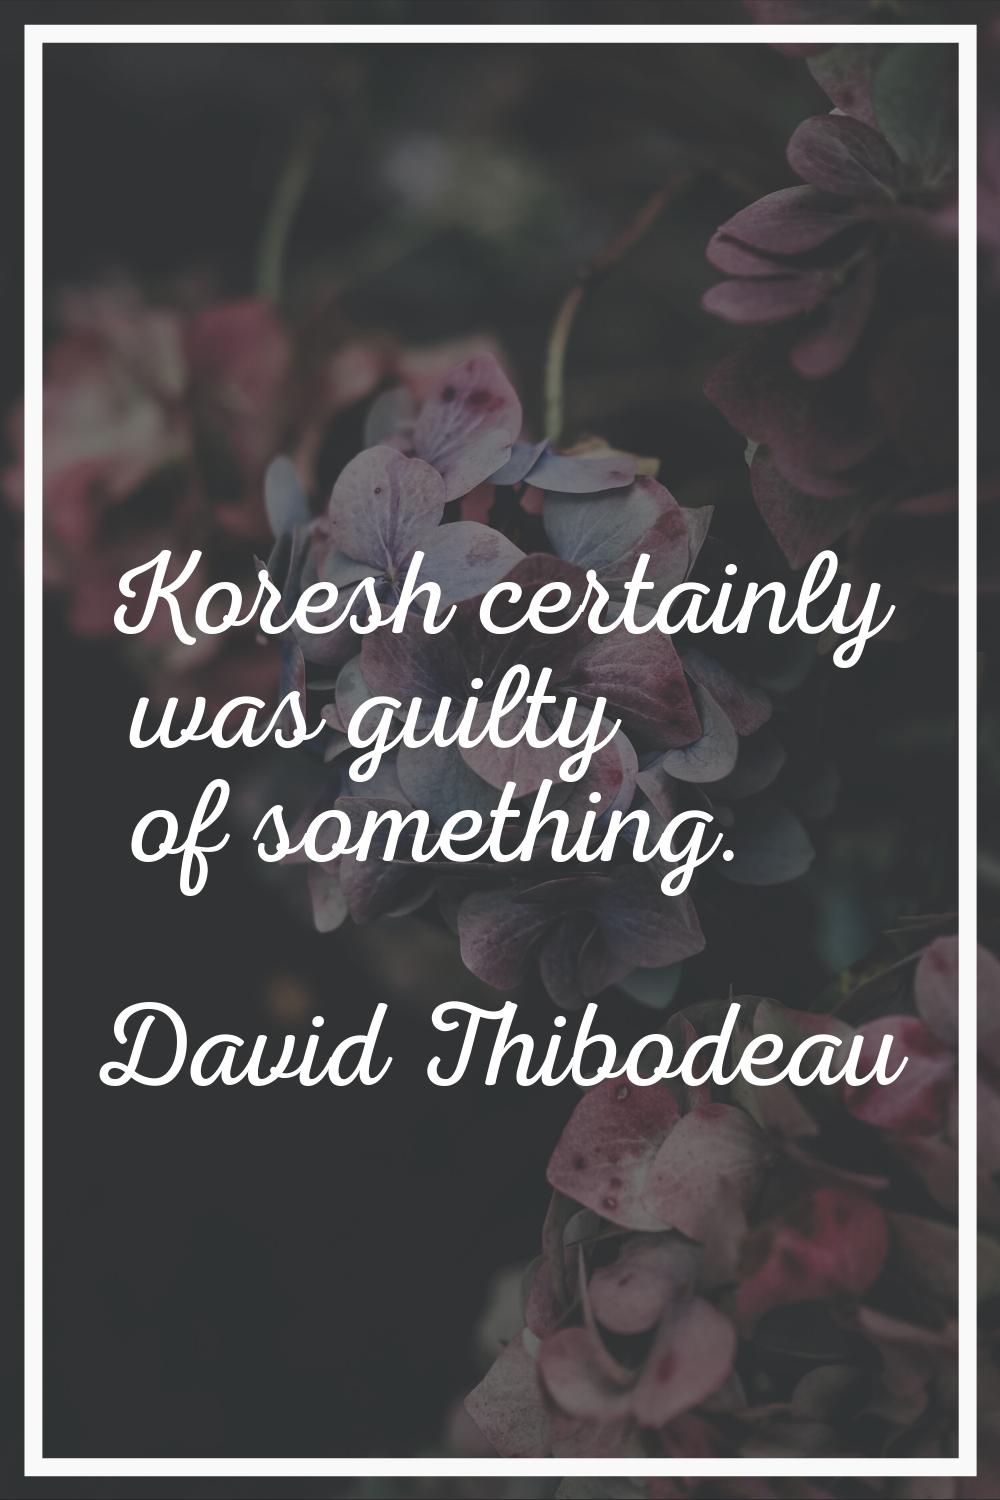 Koresh certainly was guilty of something.